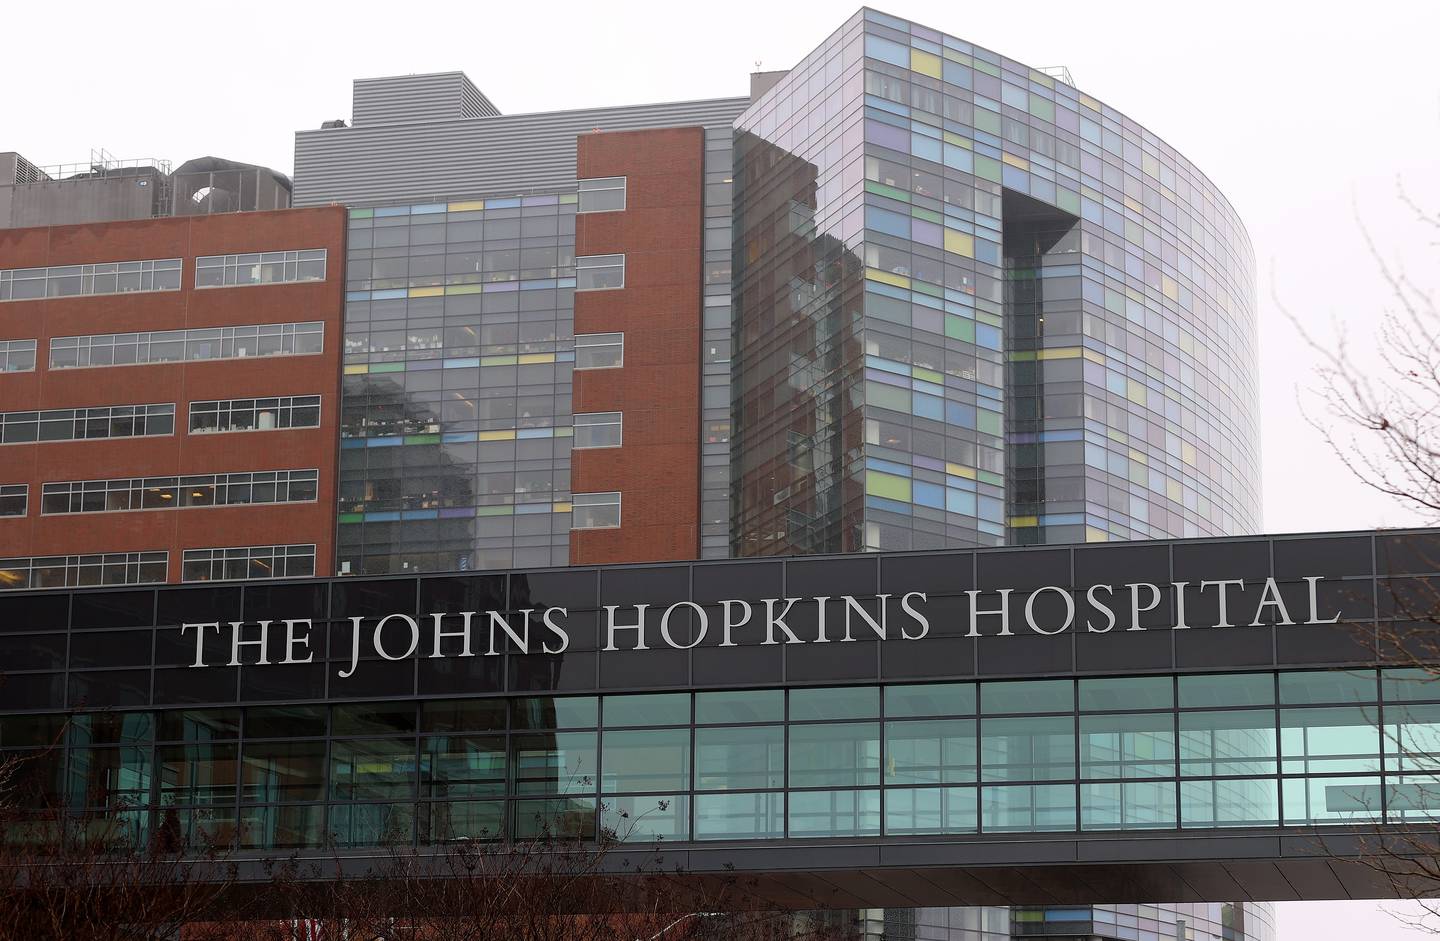 The Johns Hopkins Hospital in Baltimore, Maryland.